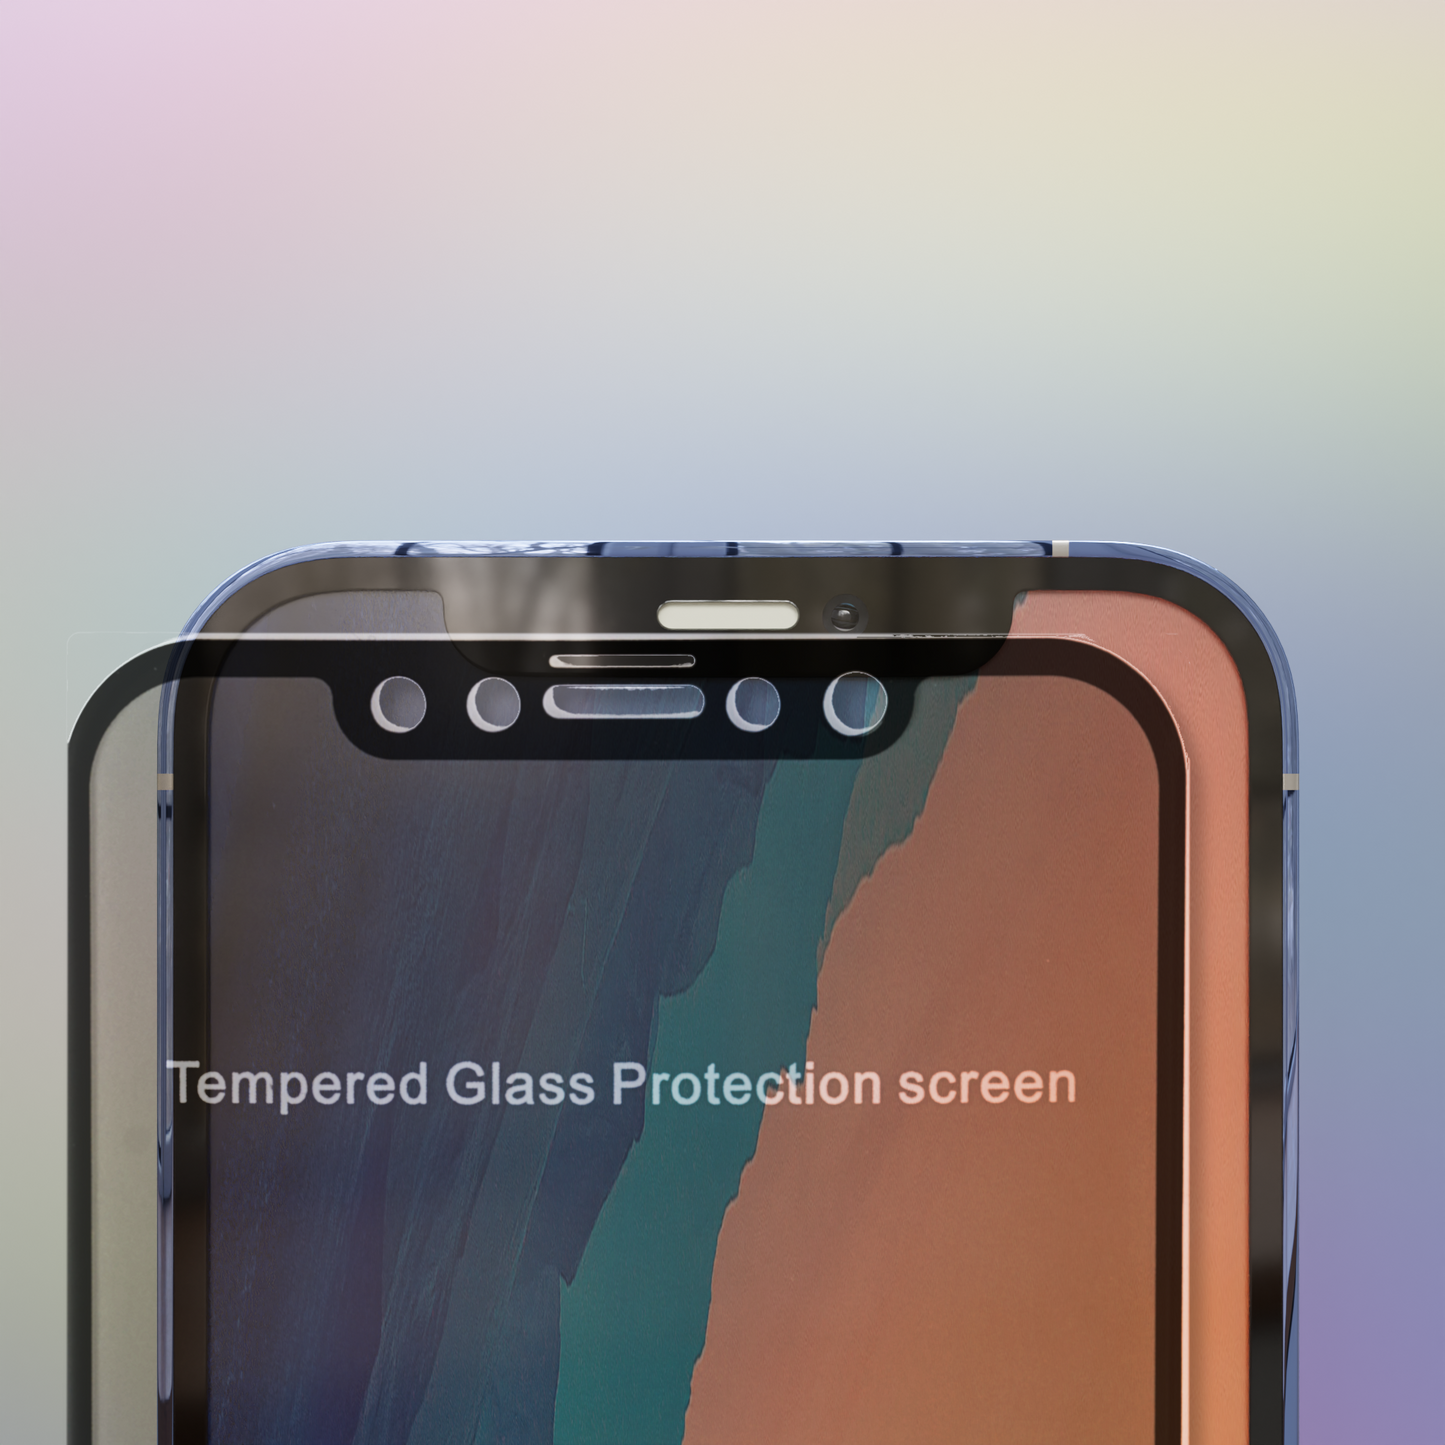 Iphone Shade - Privacy Screen Protector - Unknown Group Team